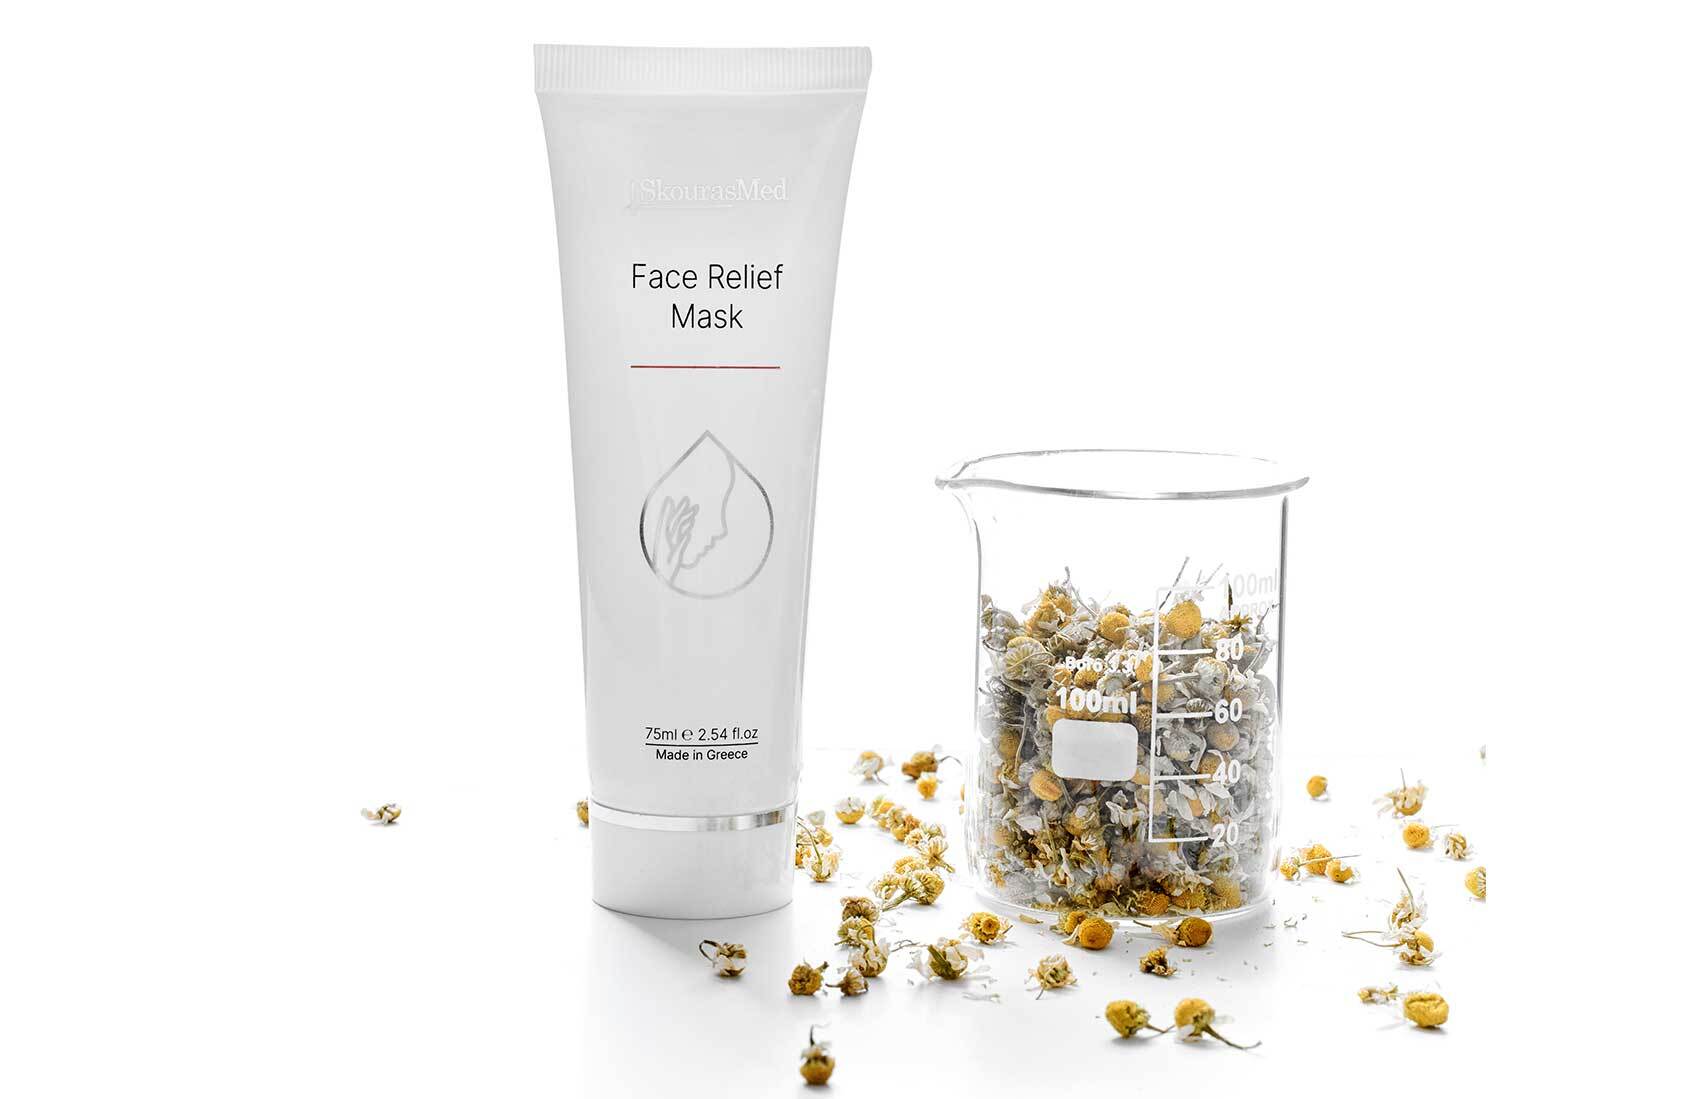 FACE RELIEF MASK